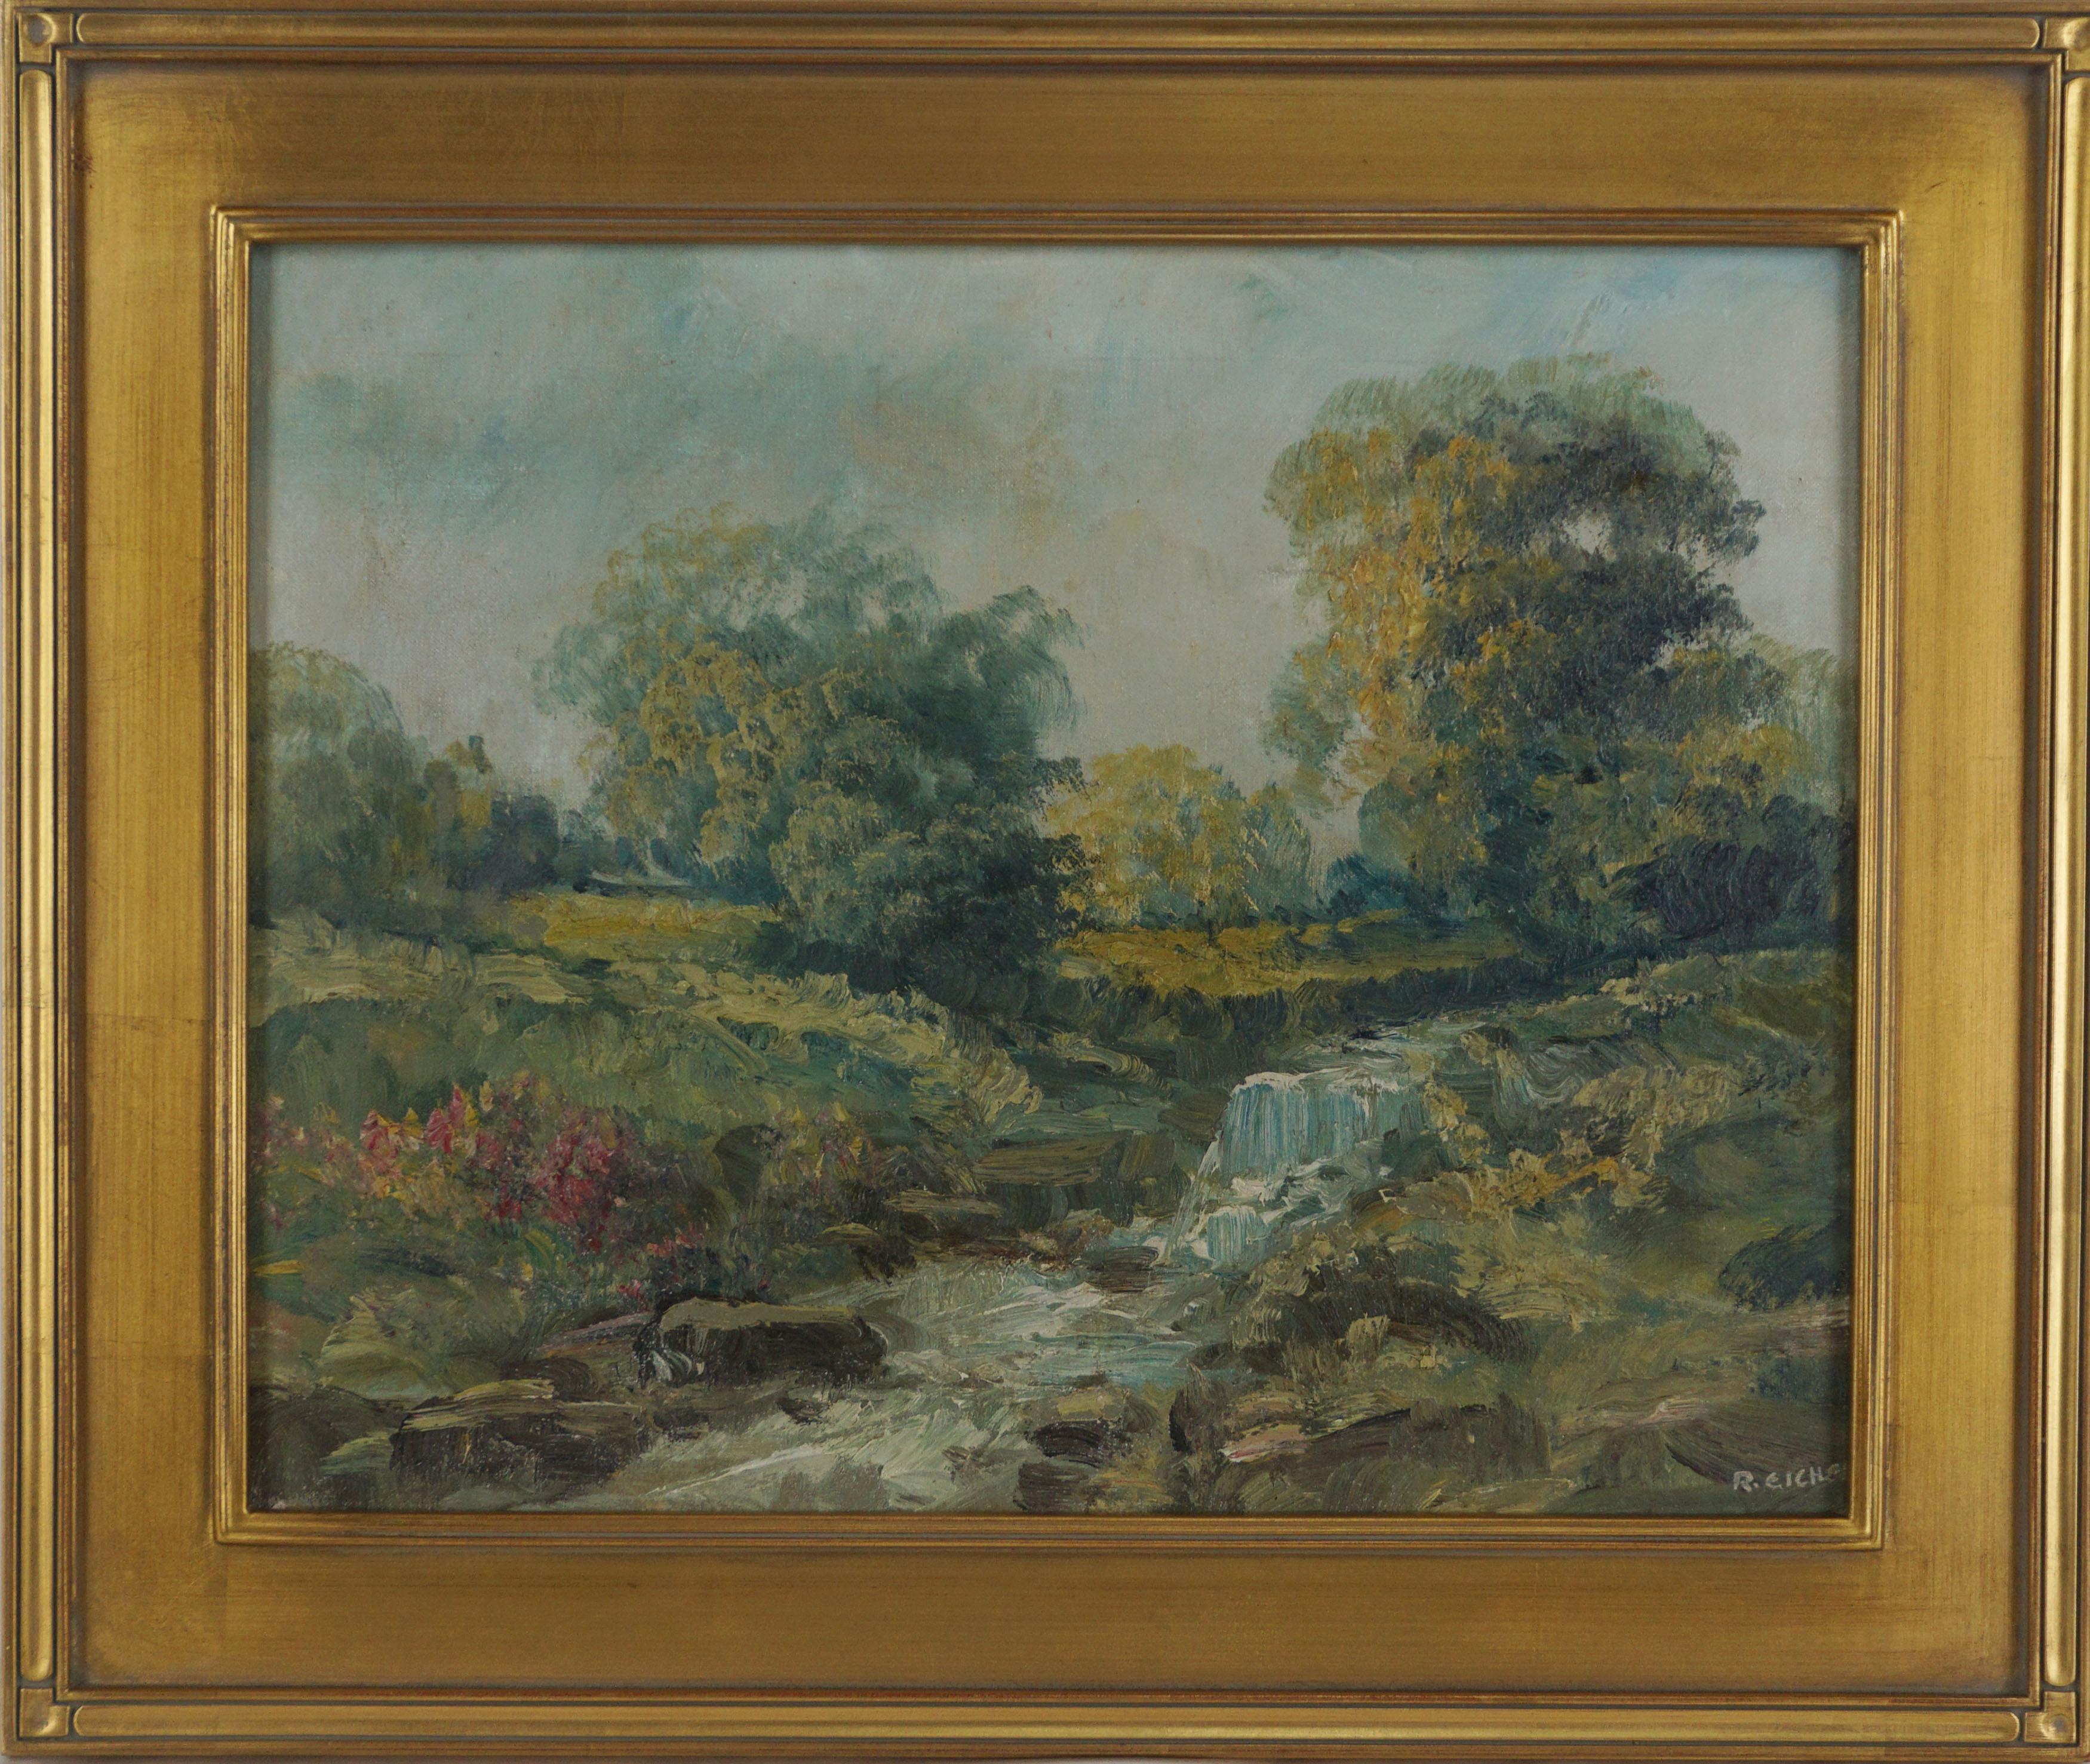 Mid 20th Century Impressionist Original Oil Landscape of Shongum, New Jersey - Painting by Rudolph Eicher